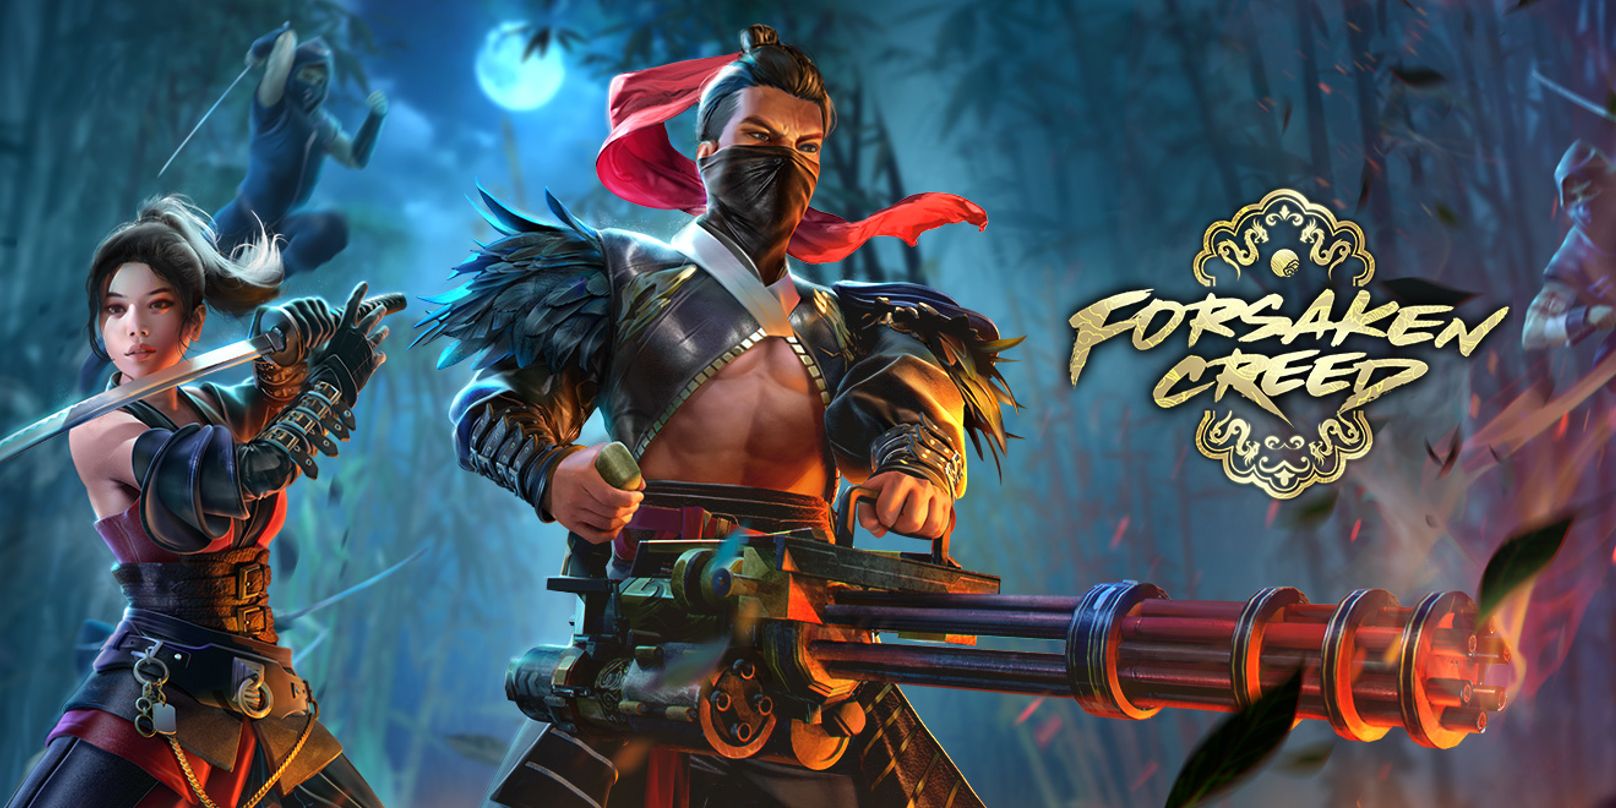 Garena Free Fire's latest Elite Pass, Forsaken Creed, takes us to a world of mutants and samurai